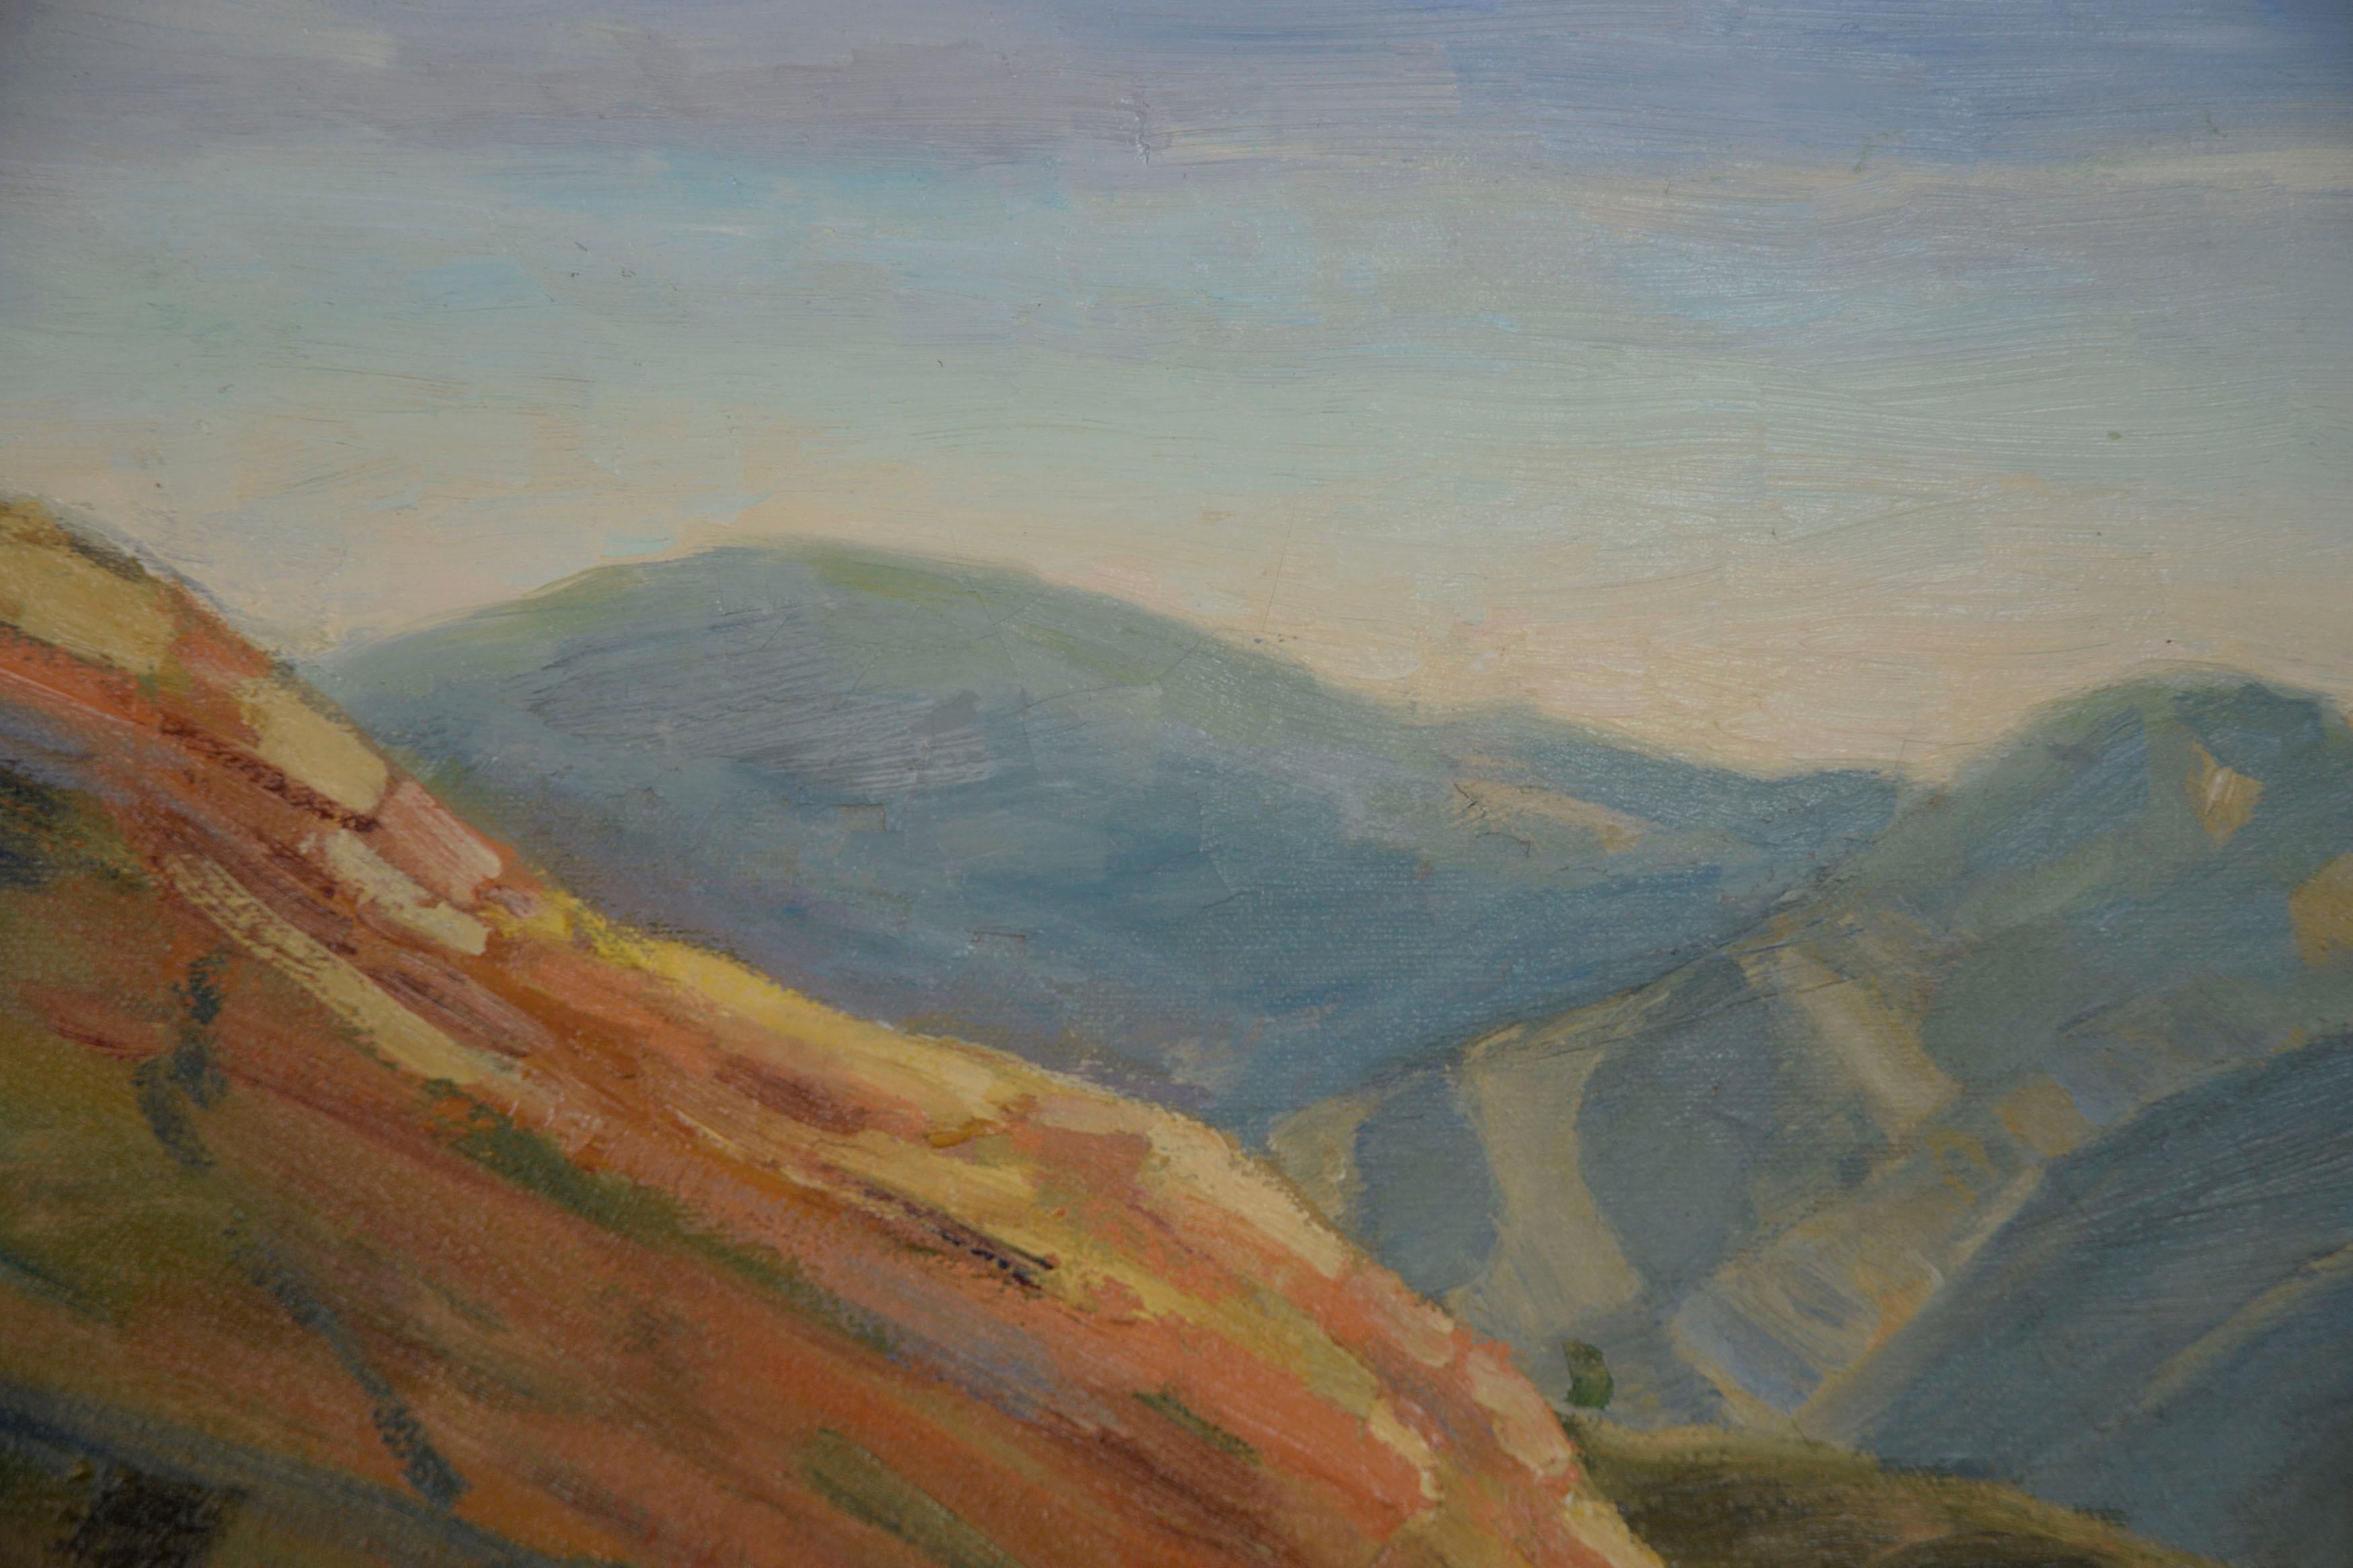 Wonderful mid-century plein air impressionistic landscape of Vasquez Rocks by Paul Miram (German/American 1904-2001), 1964. Painted in loose, painterly  style similar to famous Southern California plein air artists such as Hanson Puthuff, William